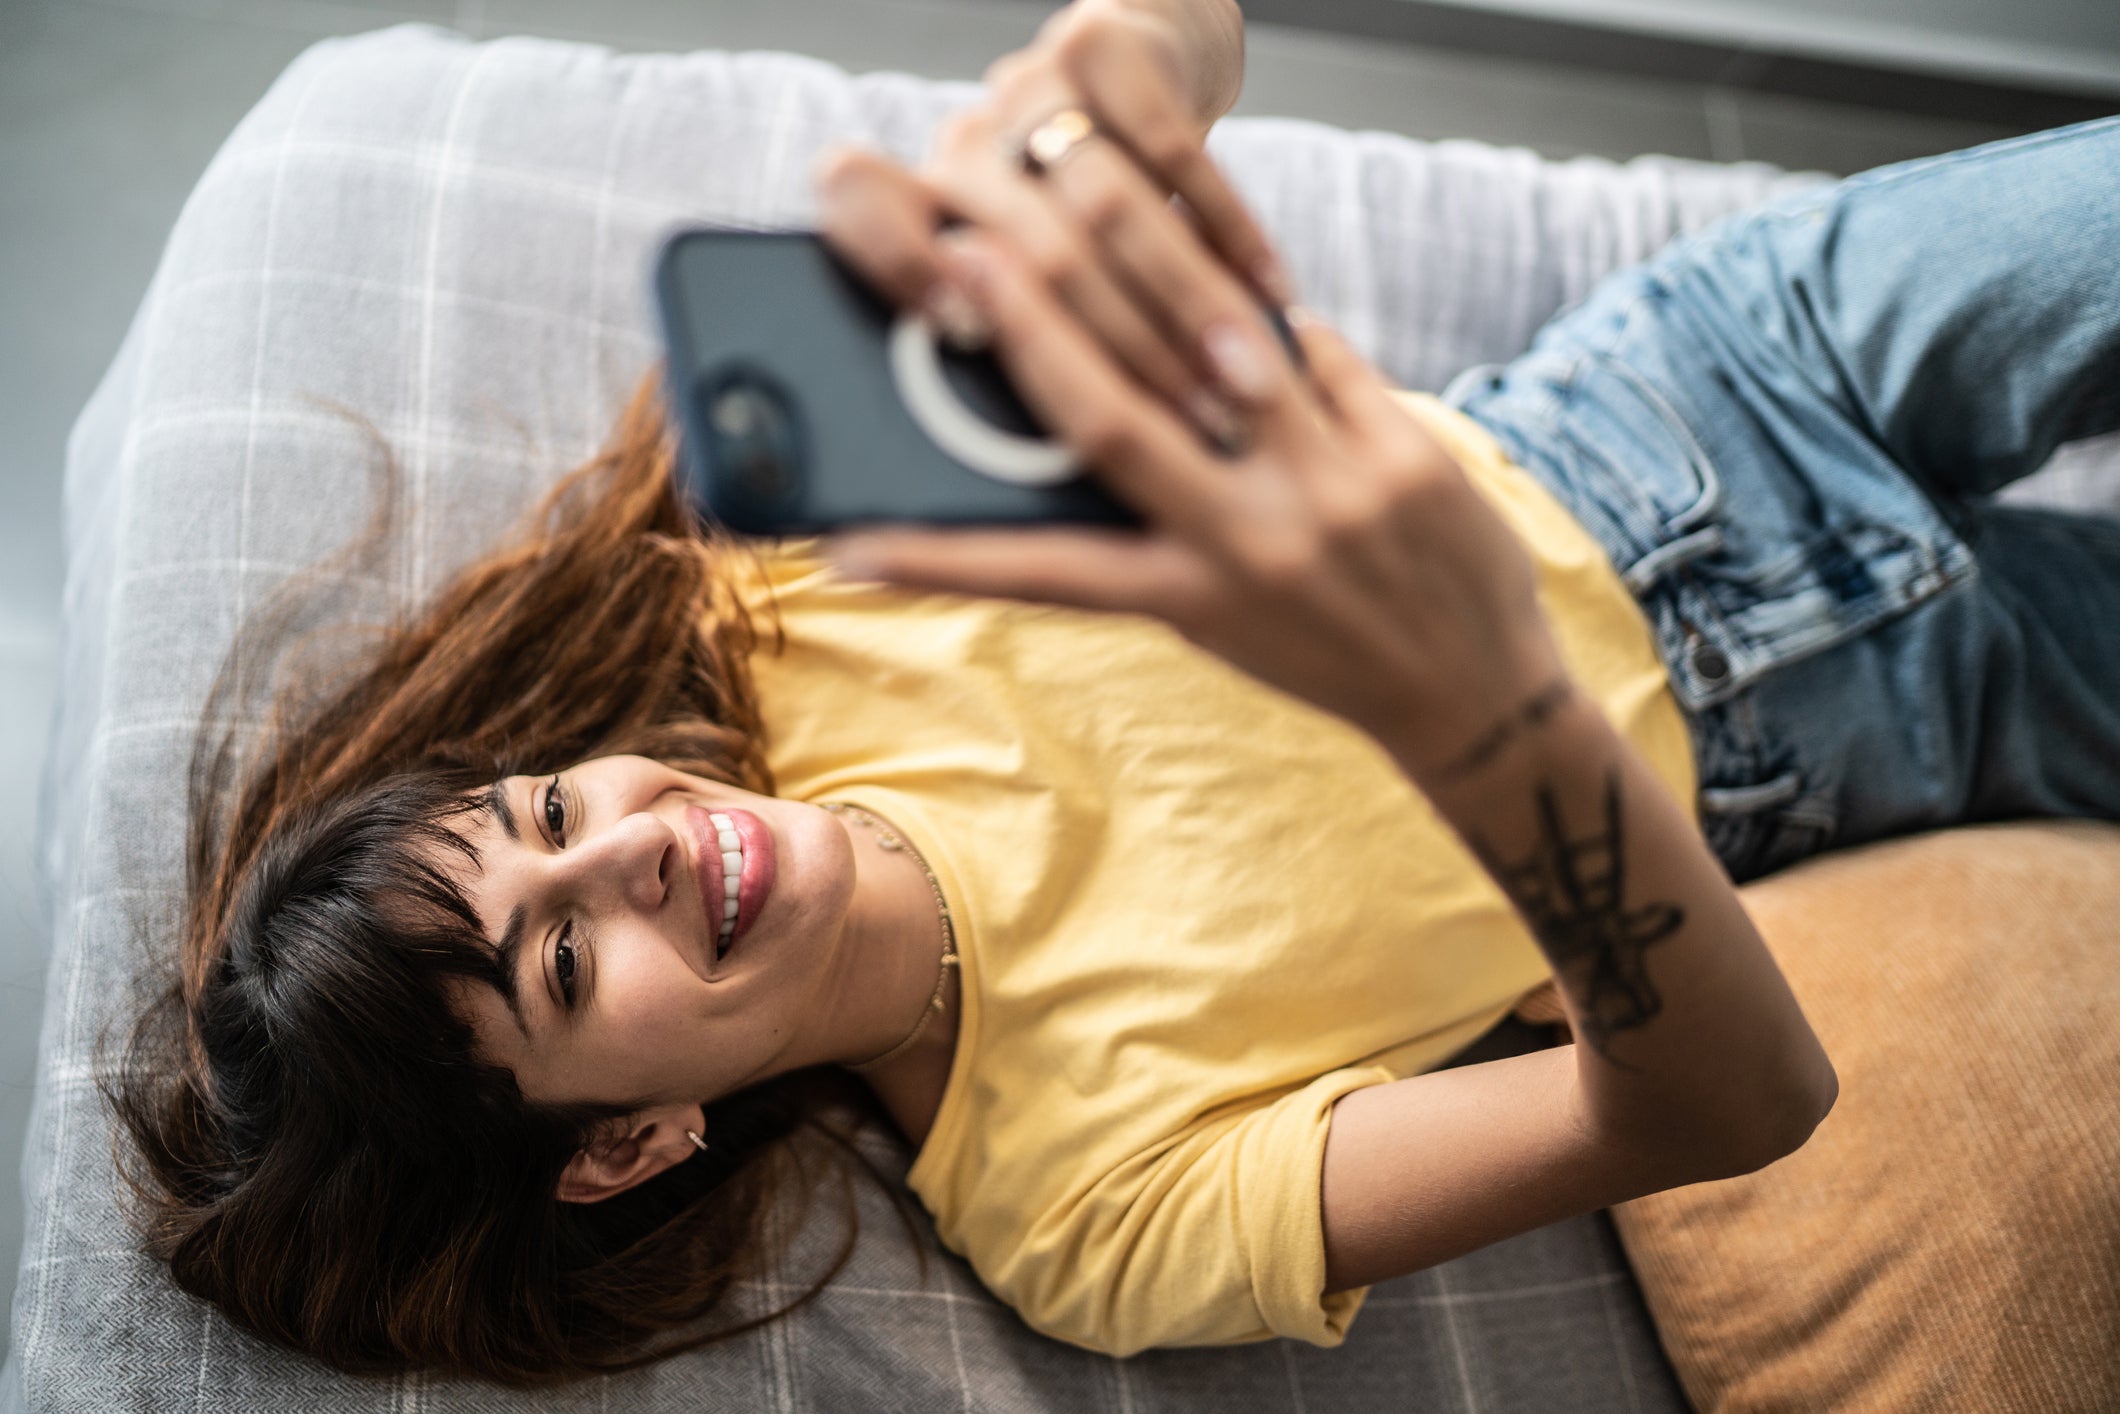 The red flags to look out for on dating apps have been revealed